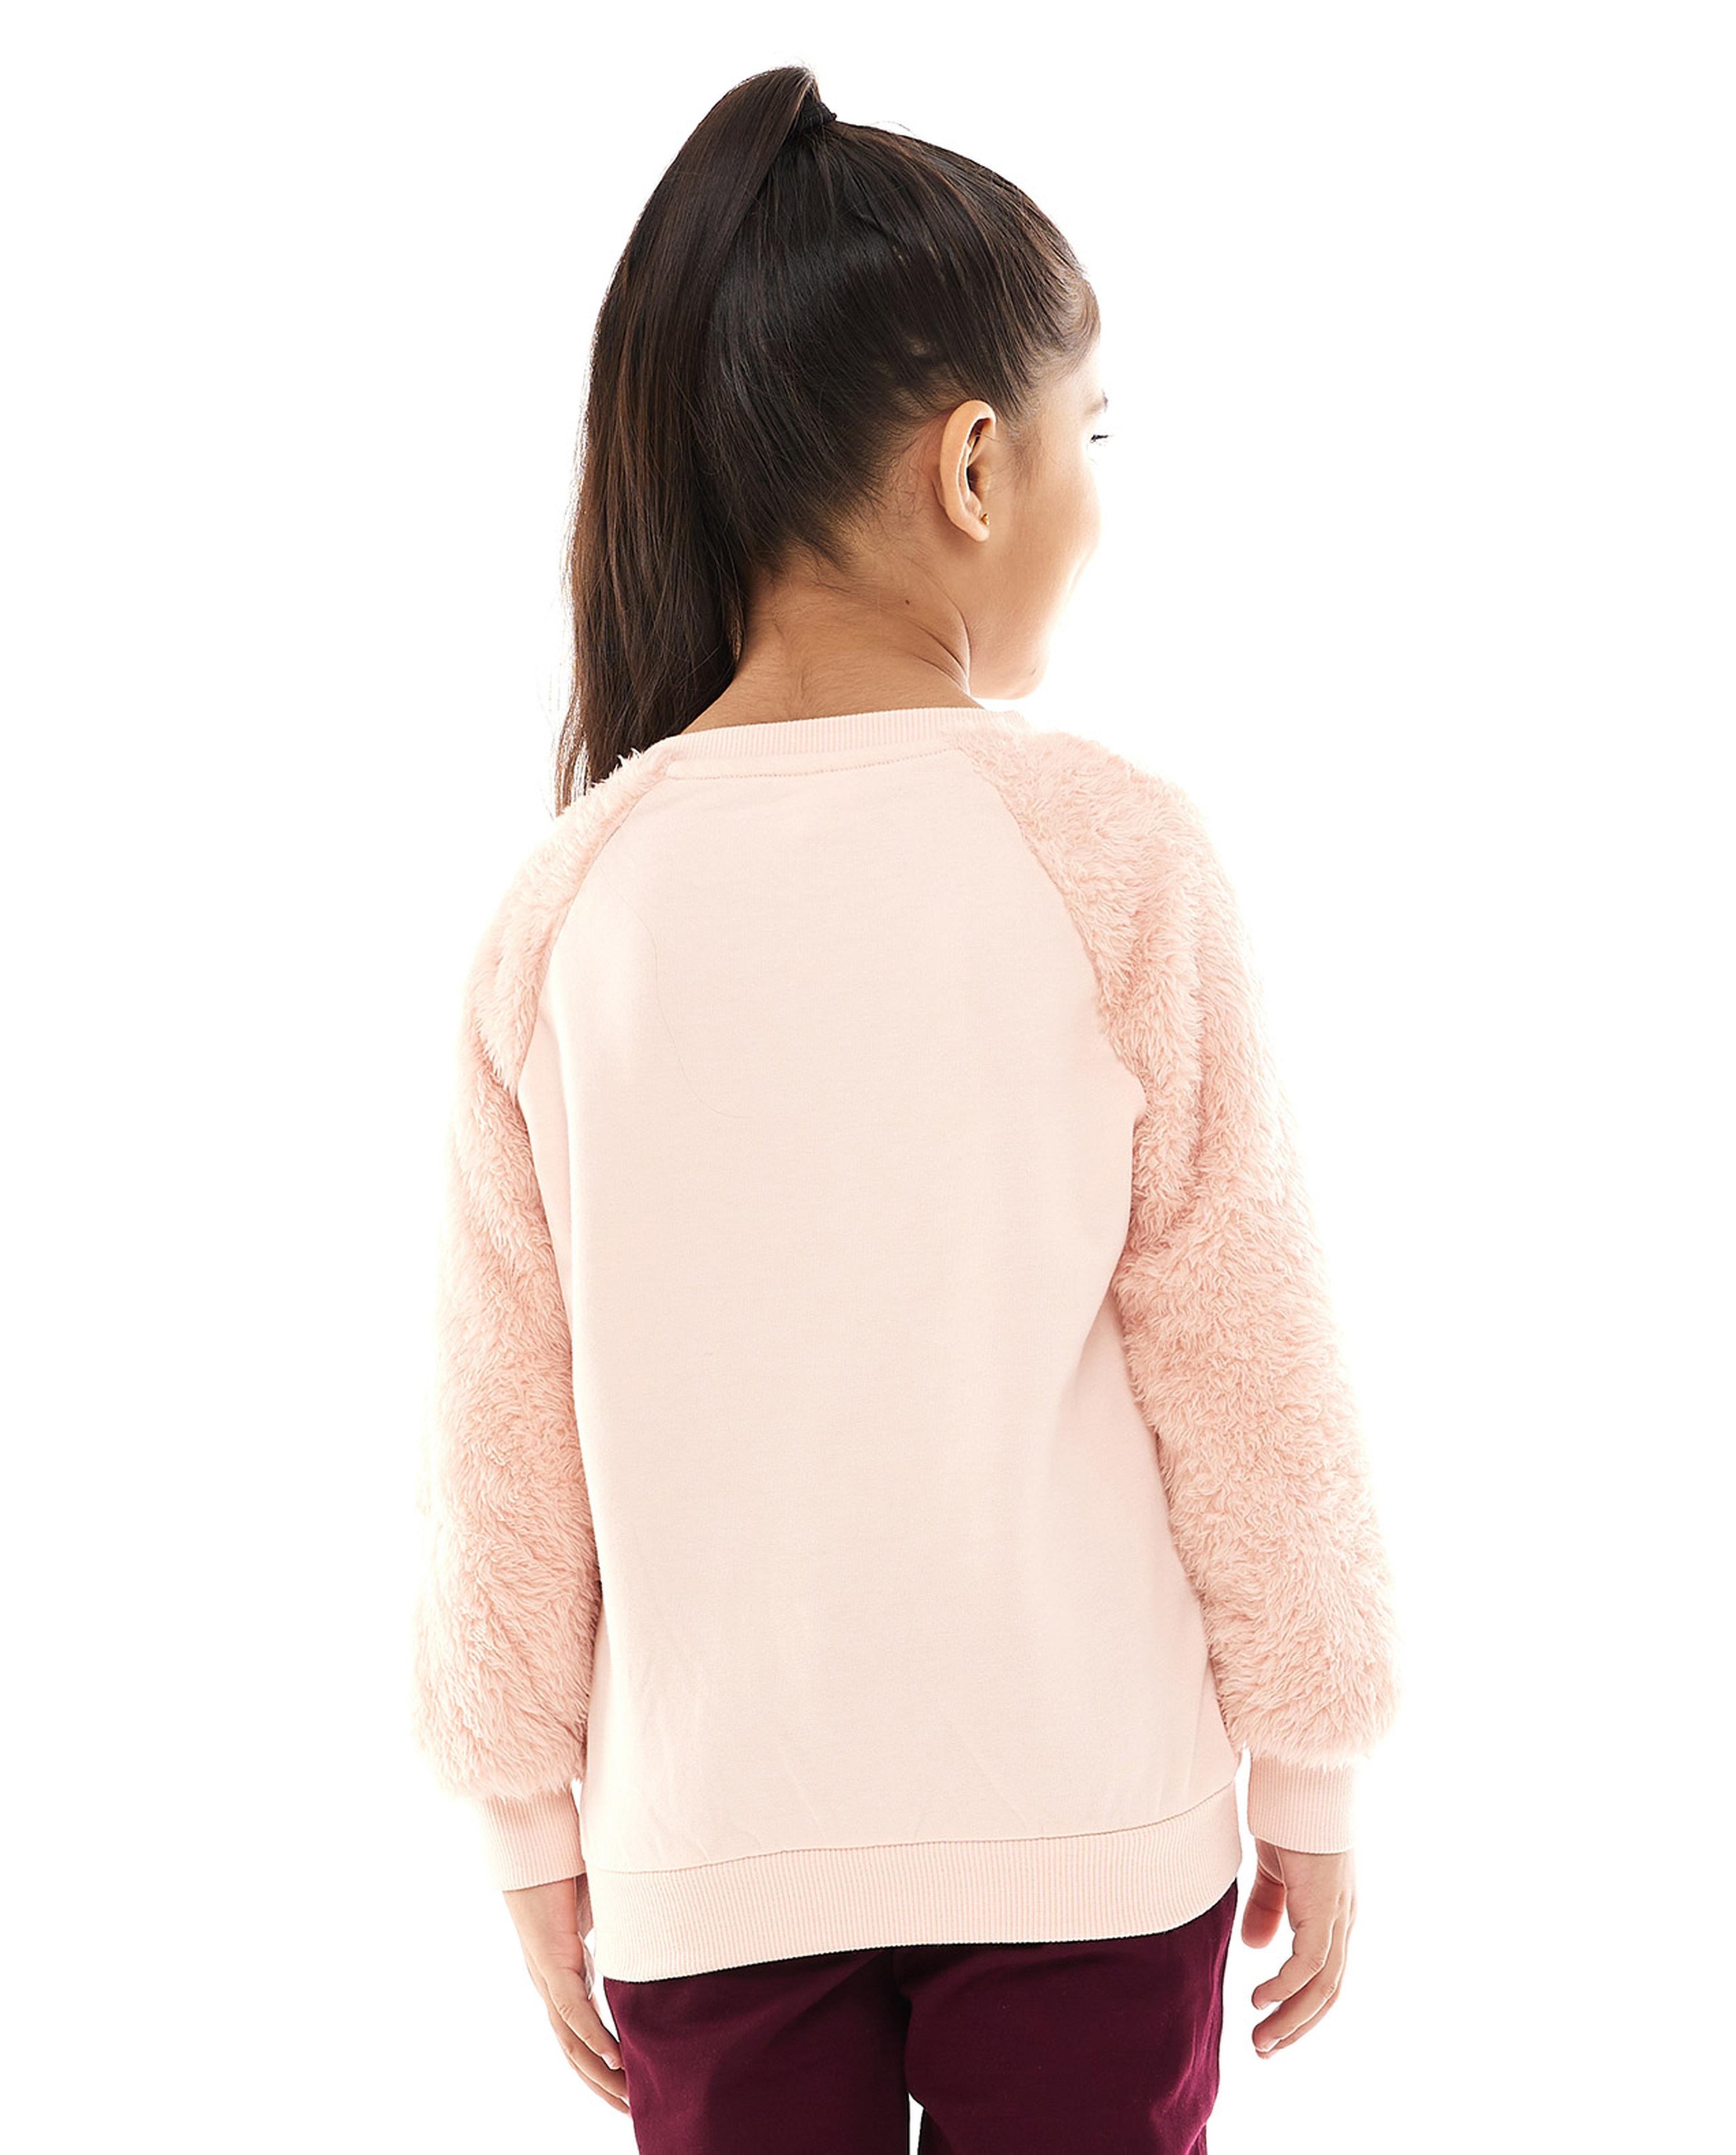 Minnie Embroidered Sweatshirt with Crew Neck and Raglan Sleeves